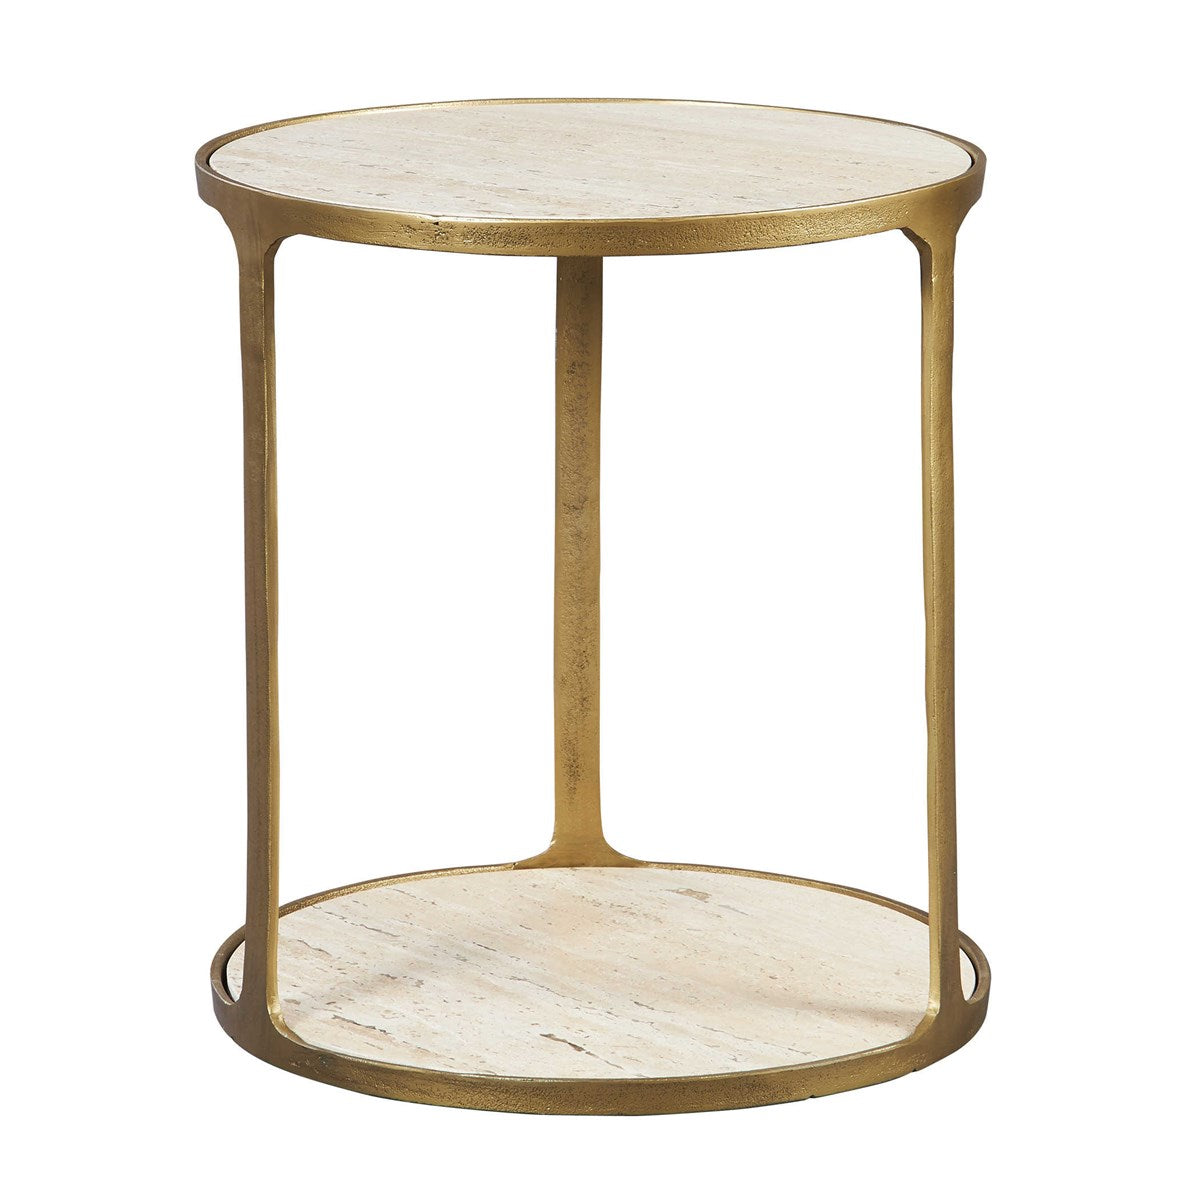 Clench Side Table